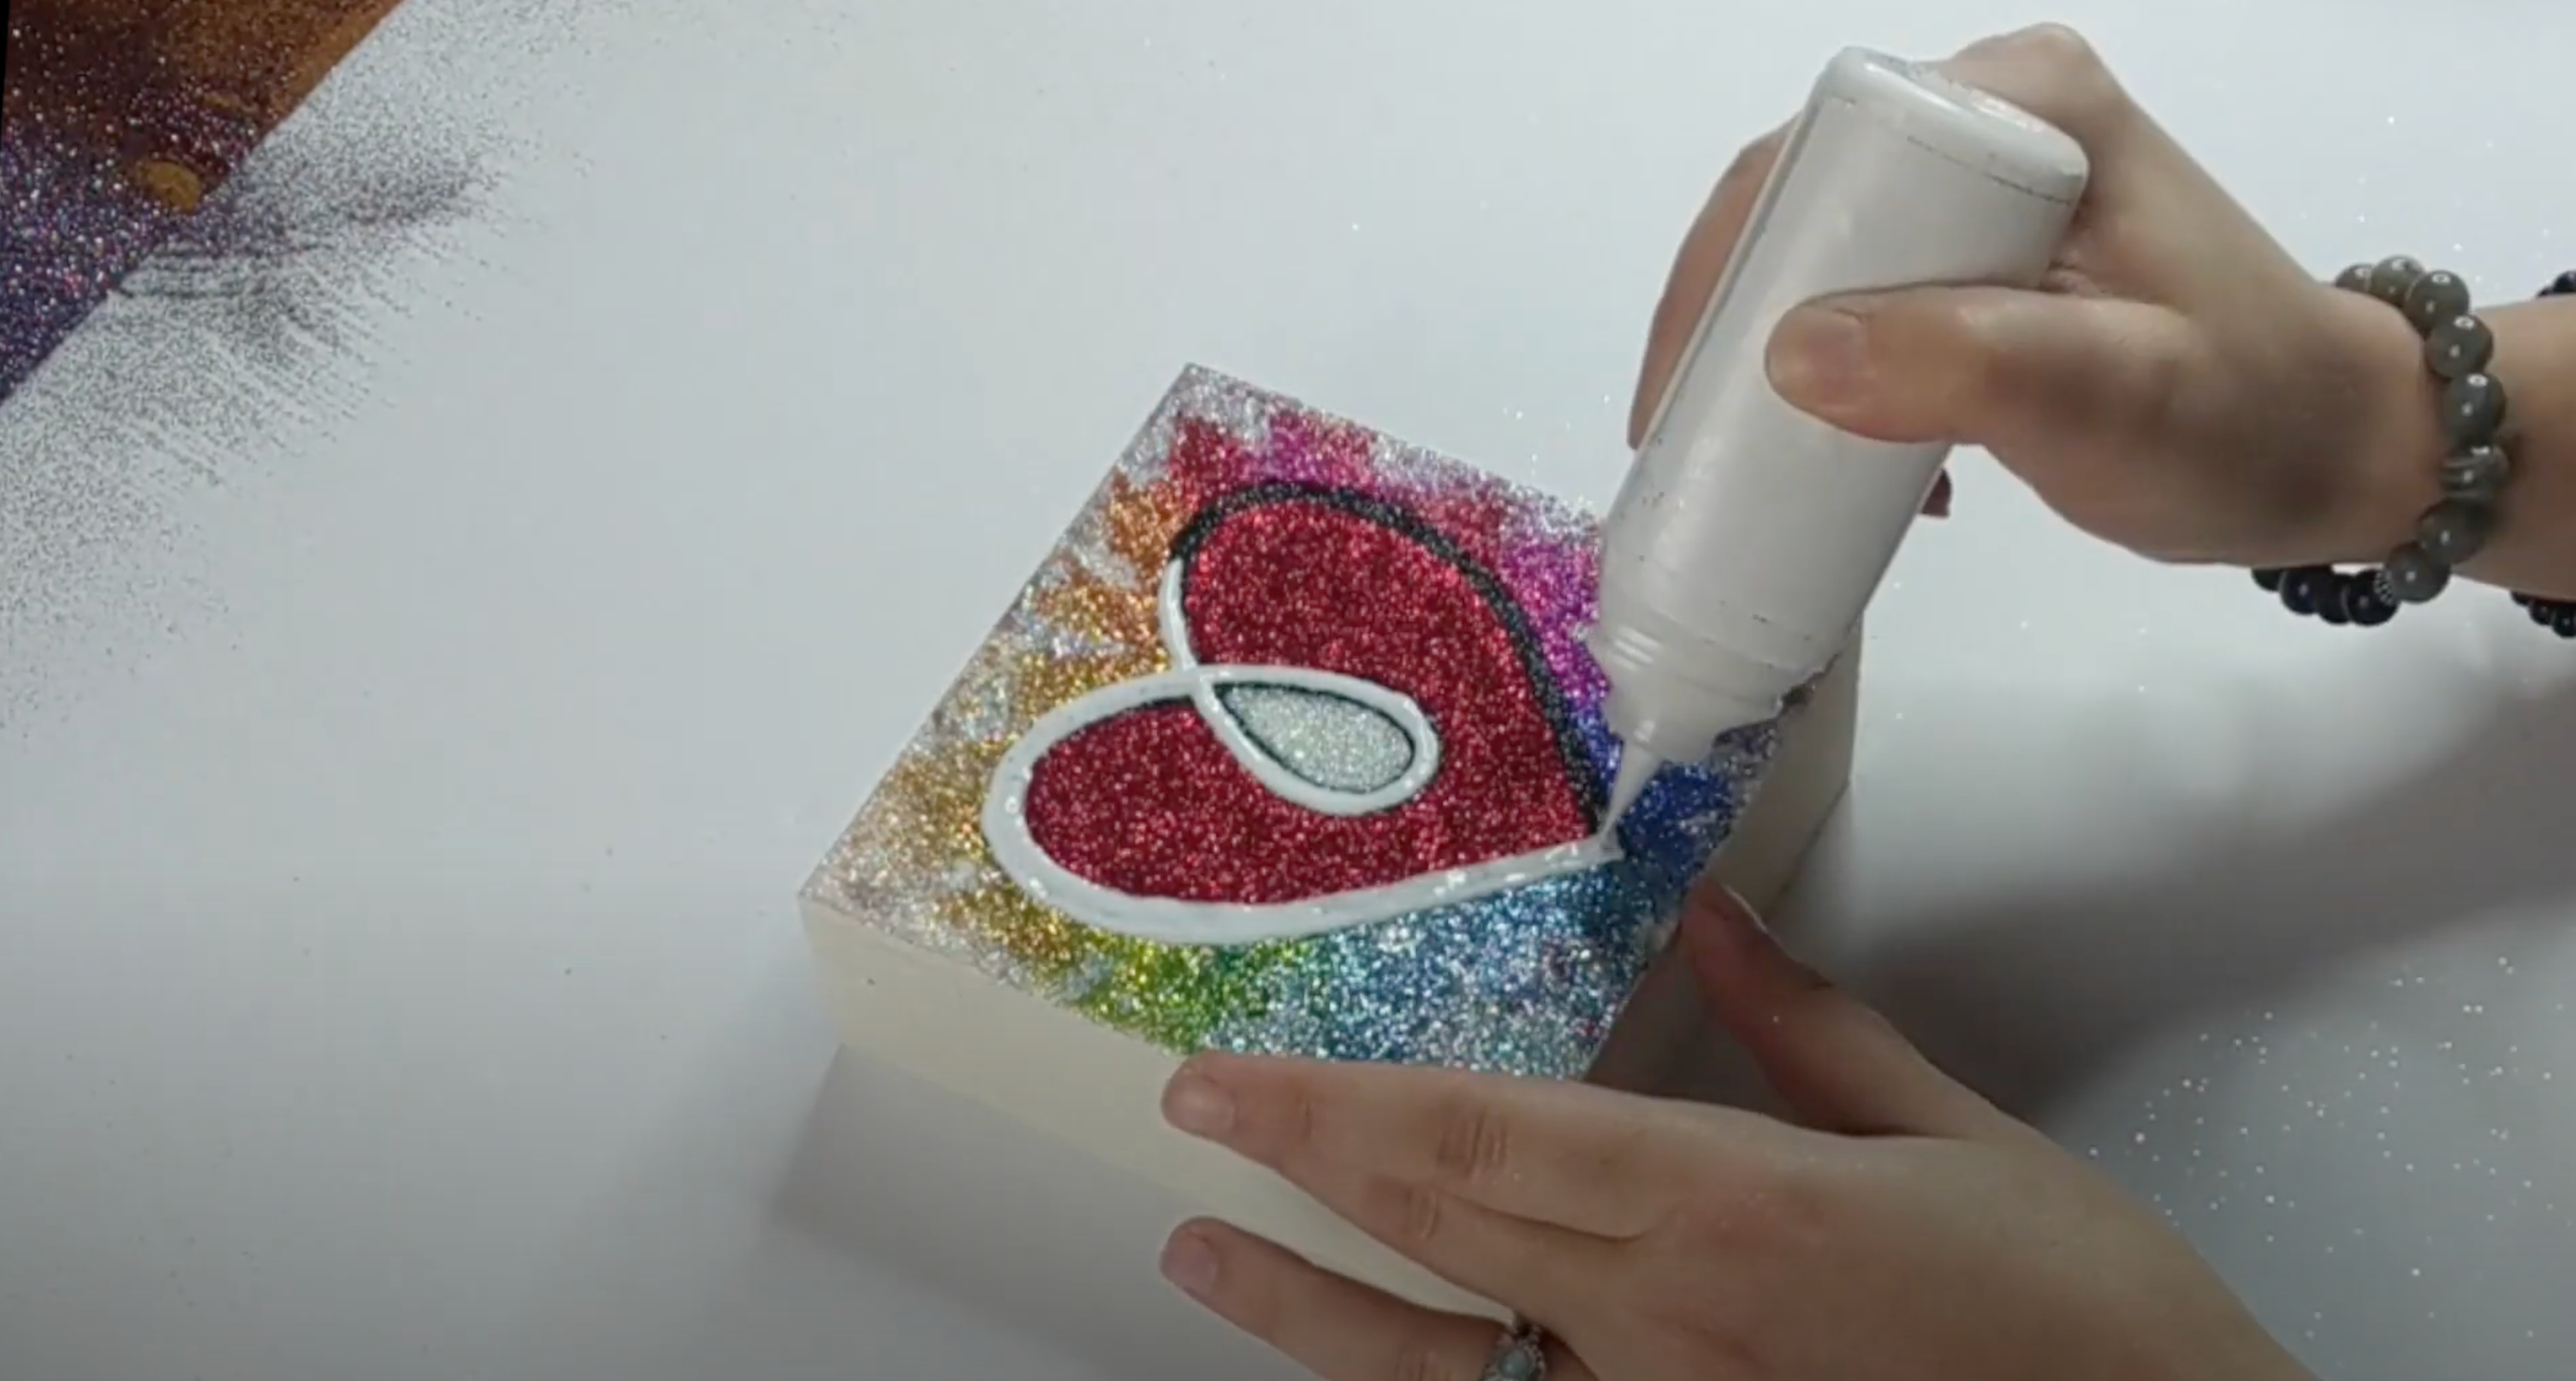 Introducing Glitter Resin: Add sparkle to your prints.